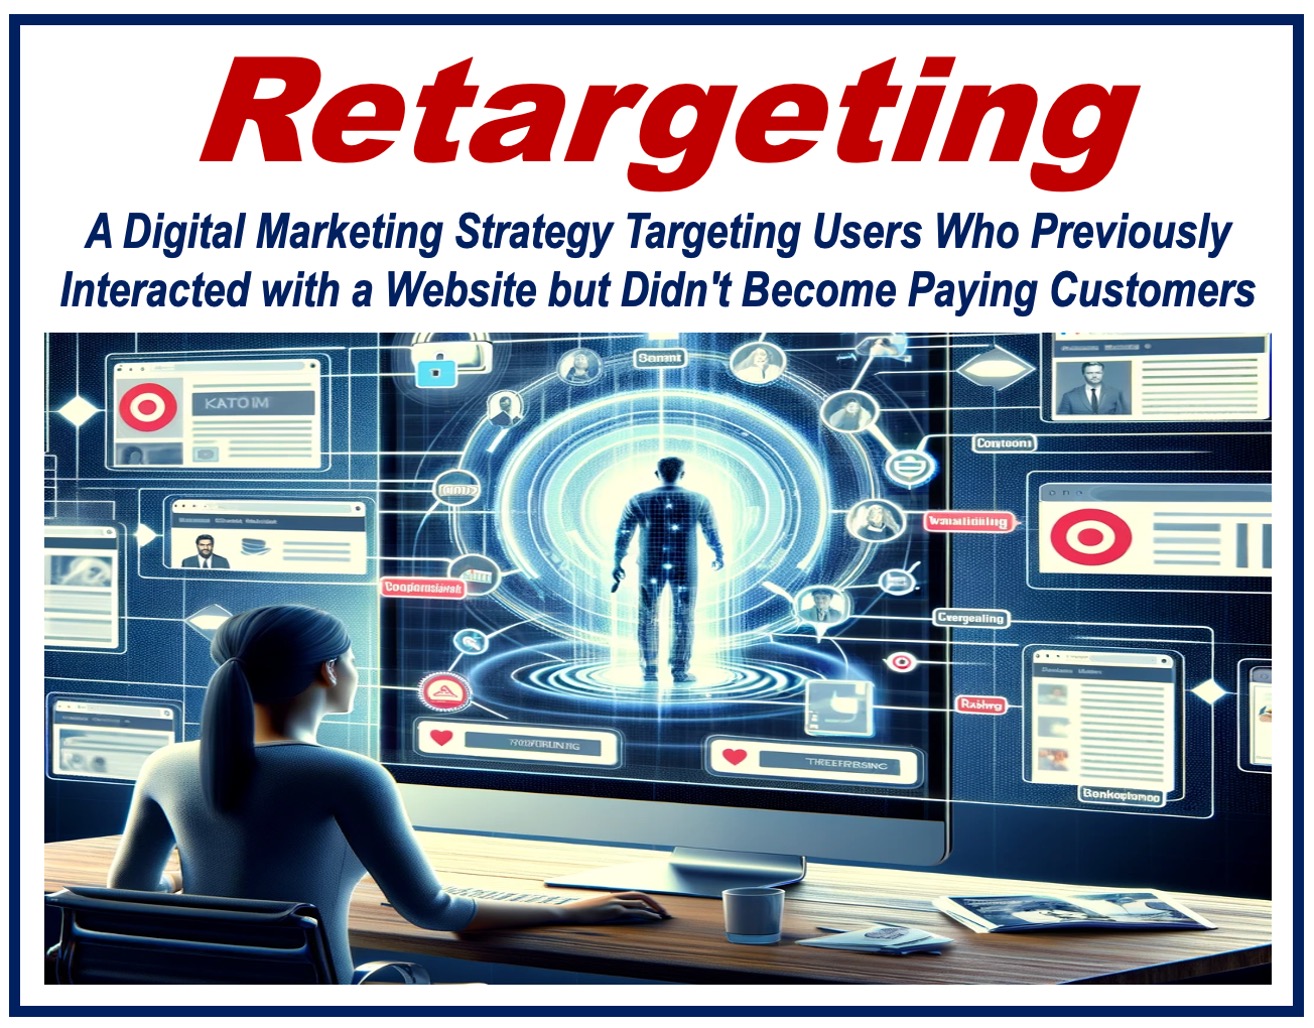 Image depicting retargeting as a marketing strategy.